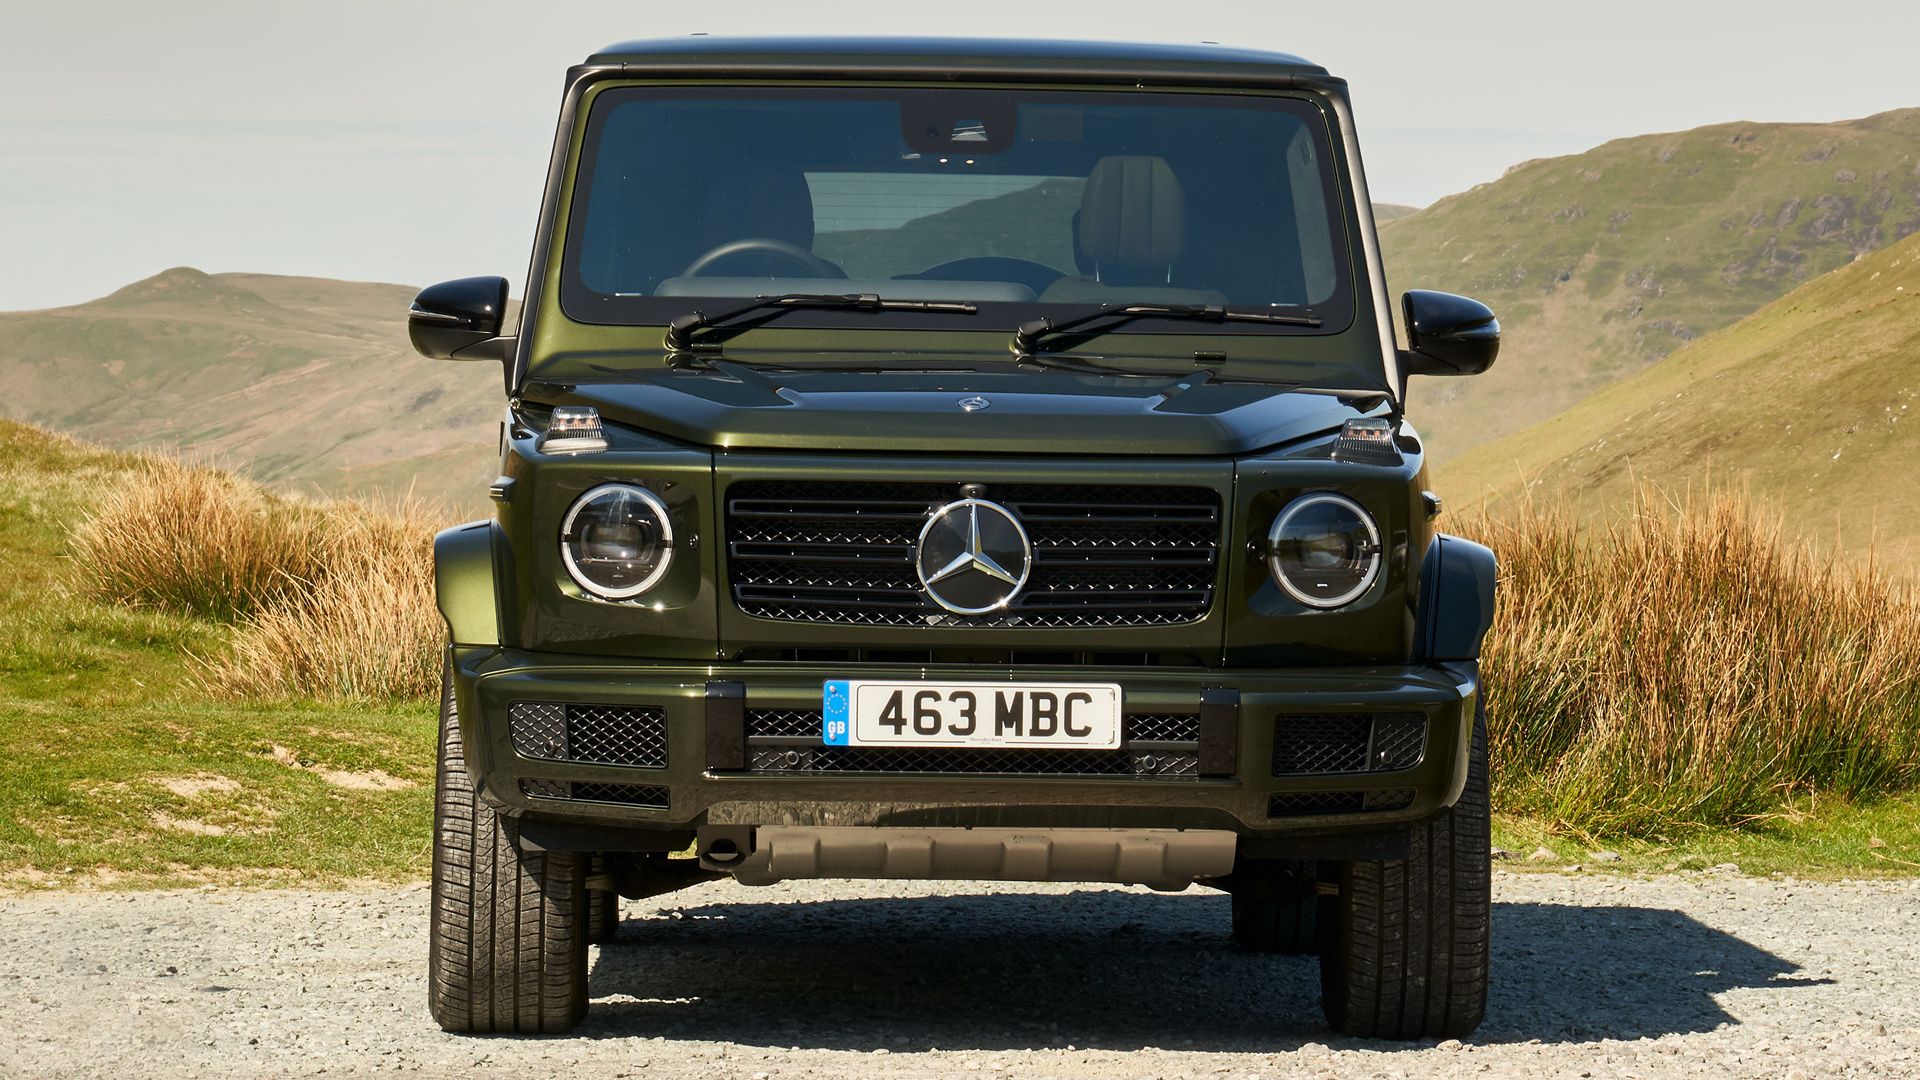 Mercedes Benz G Class (UK) And HD Image